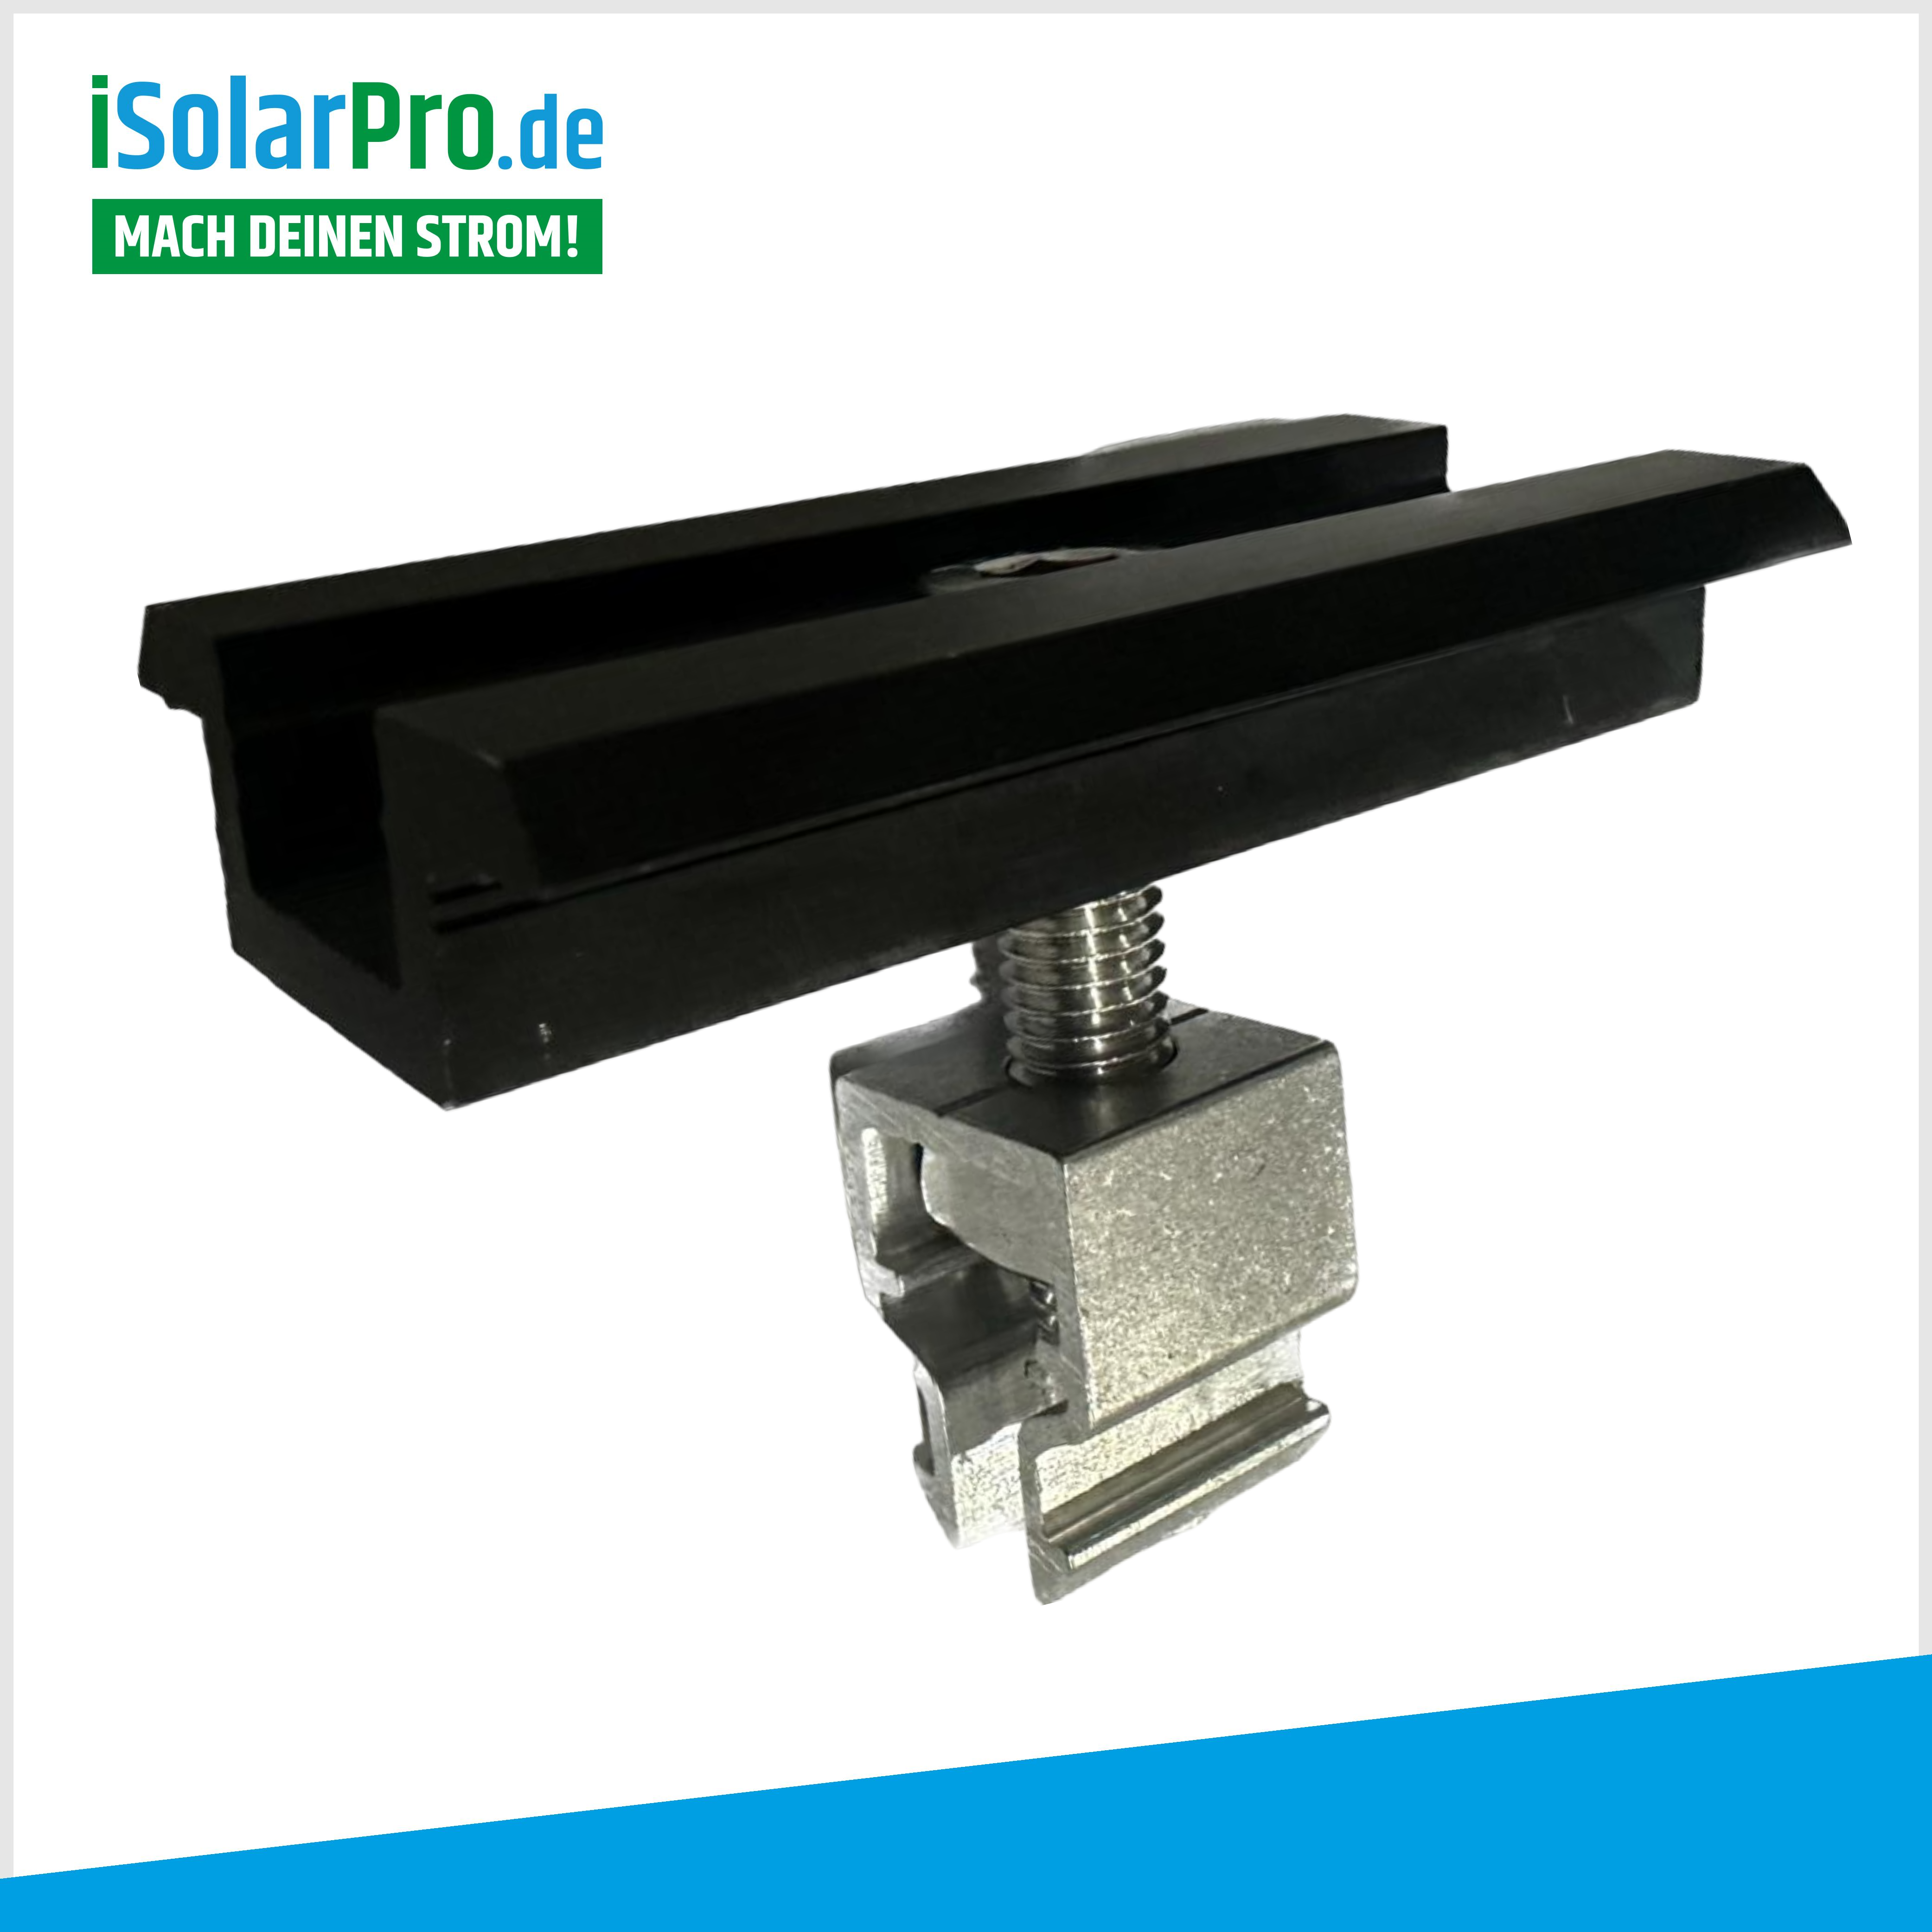 Roof mounting set for 2x solar panels 30mm, vertical 1-row installation, tiled roof